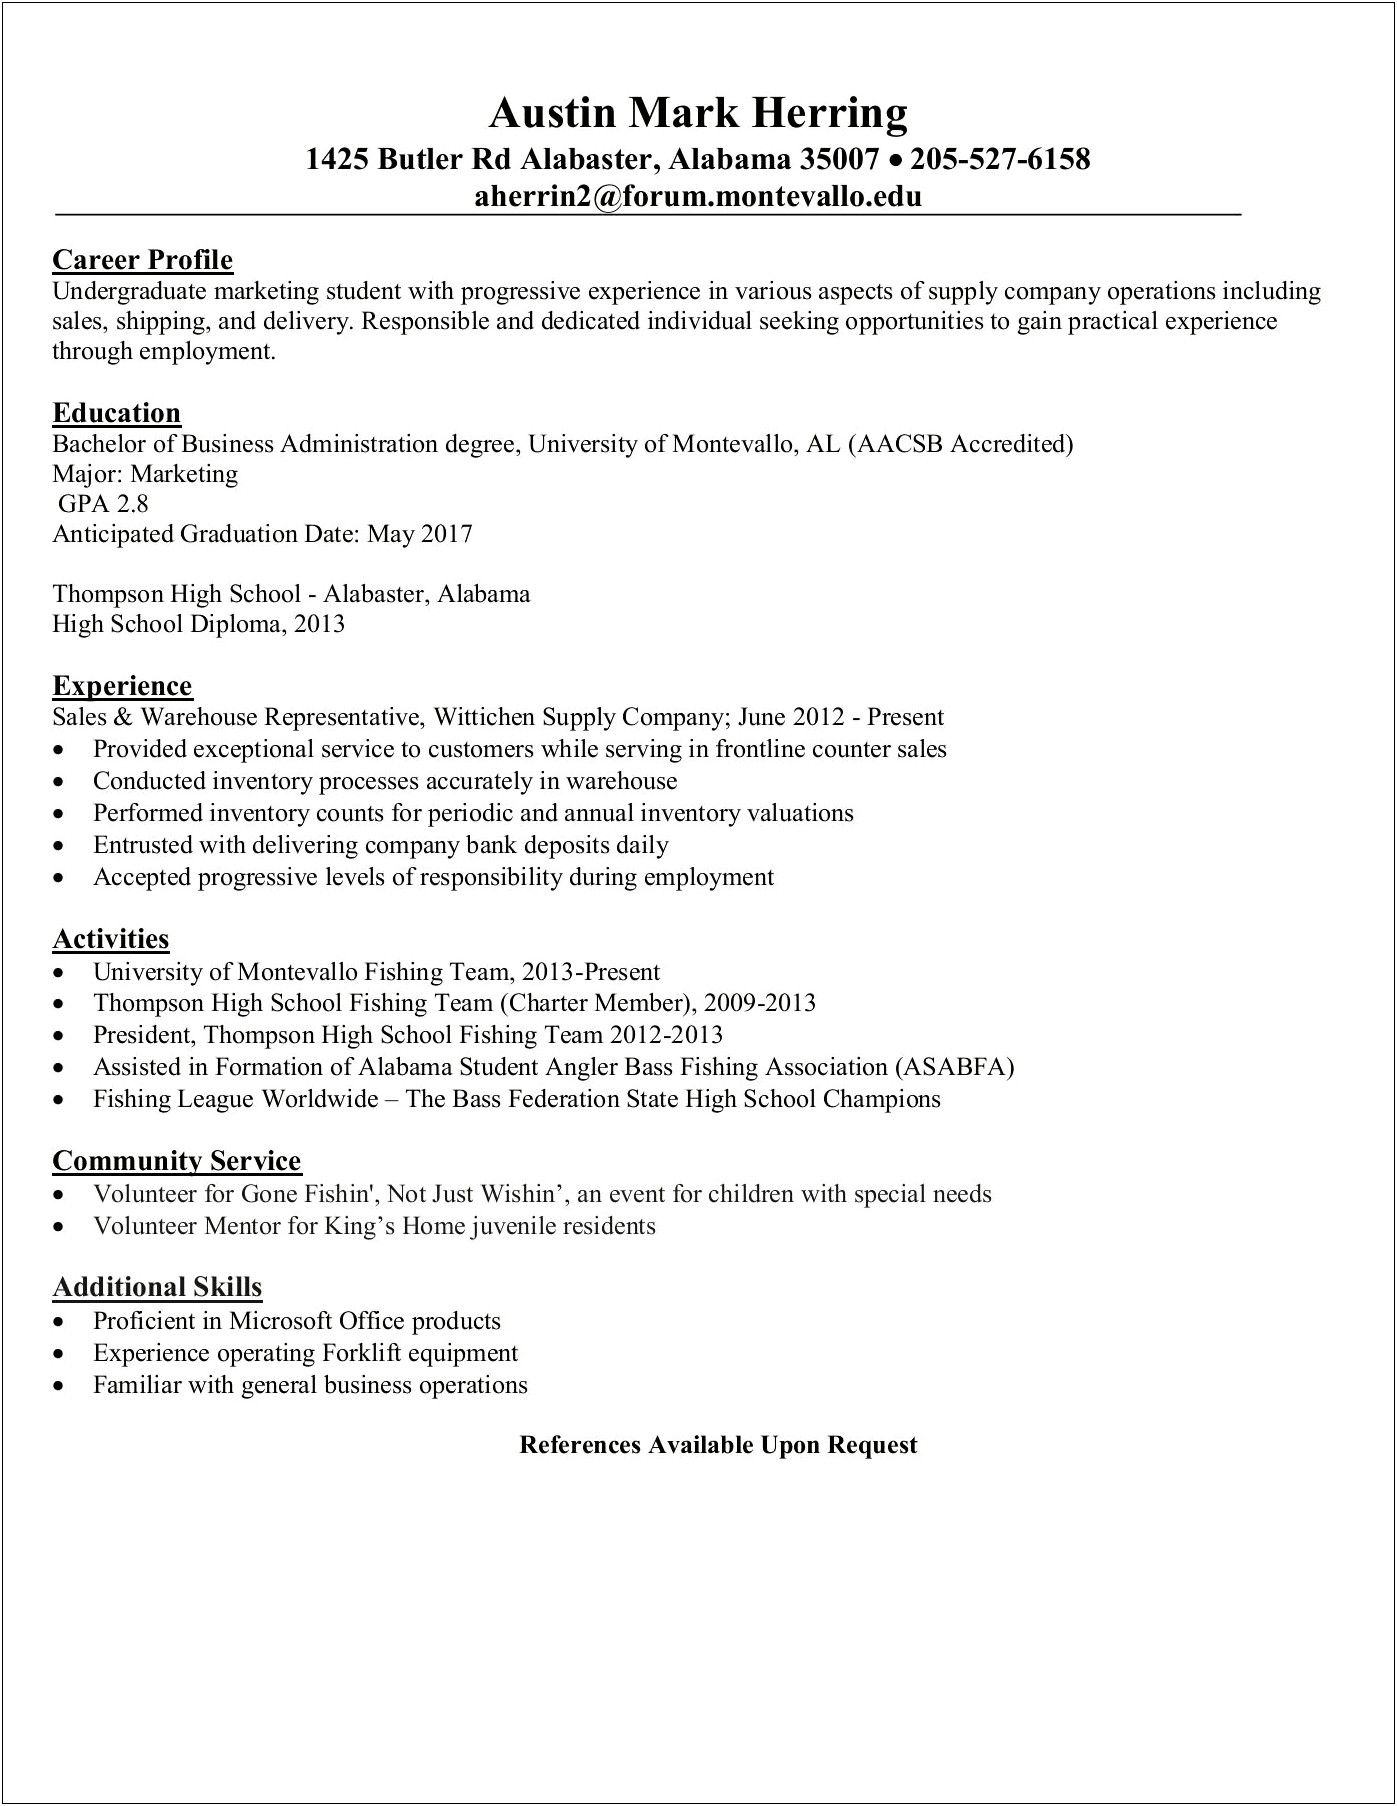 Resume With Just High School Education